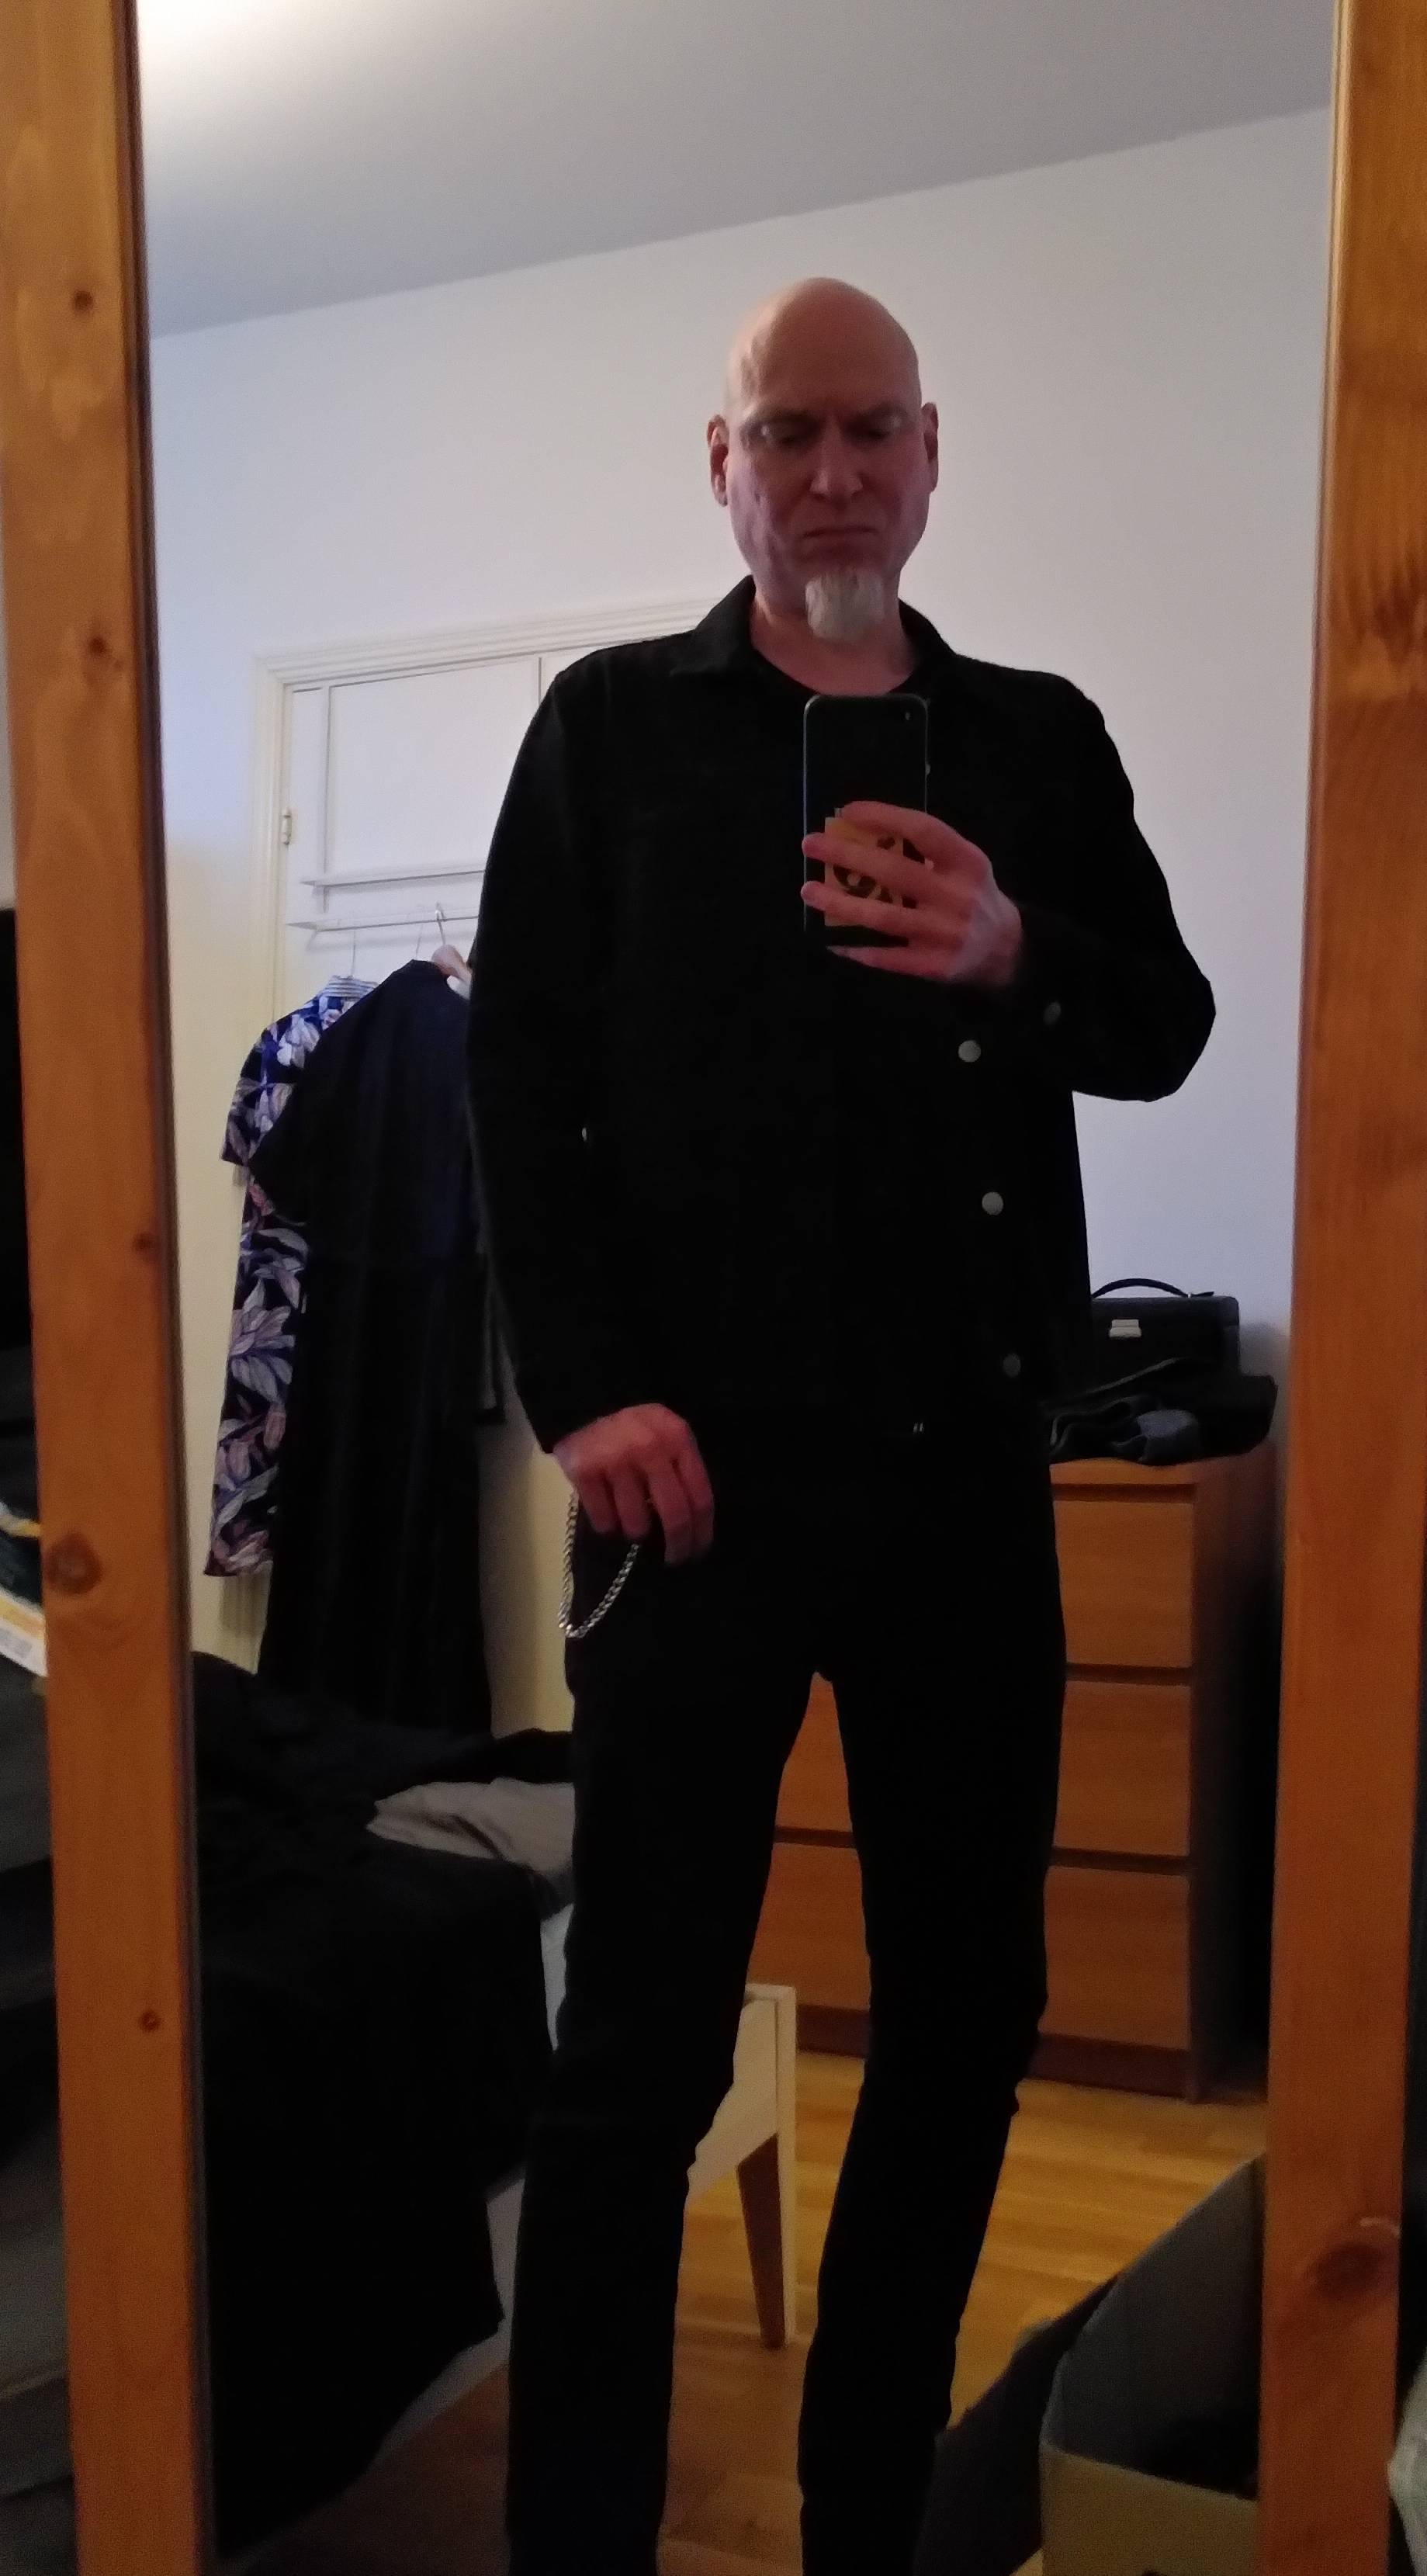 Mirror image of a white, bald man with a white goatee in black denim jacket, black t-shirt and black denim trousers with a key chain. Eyes looking down, so no eye contact.